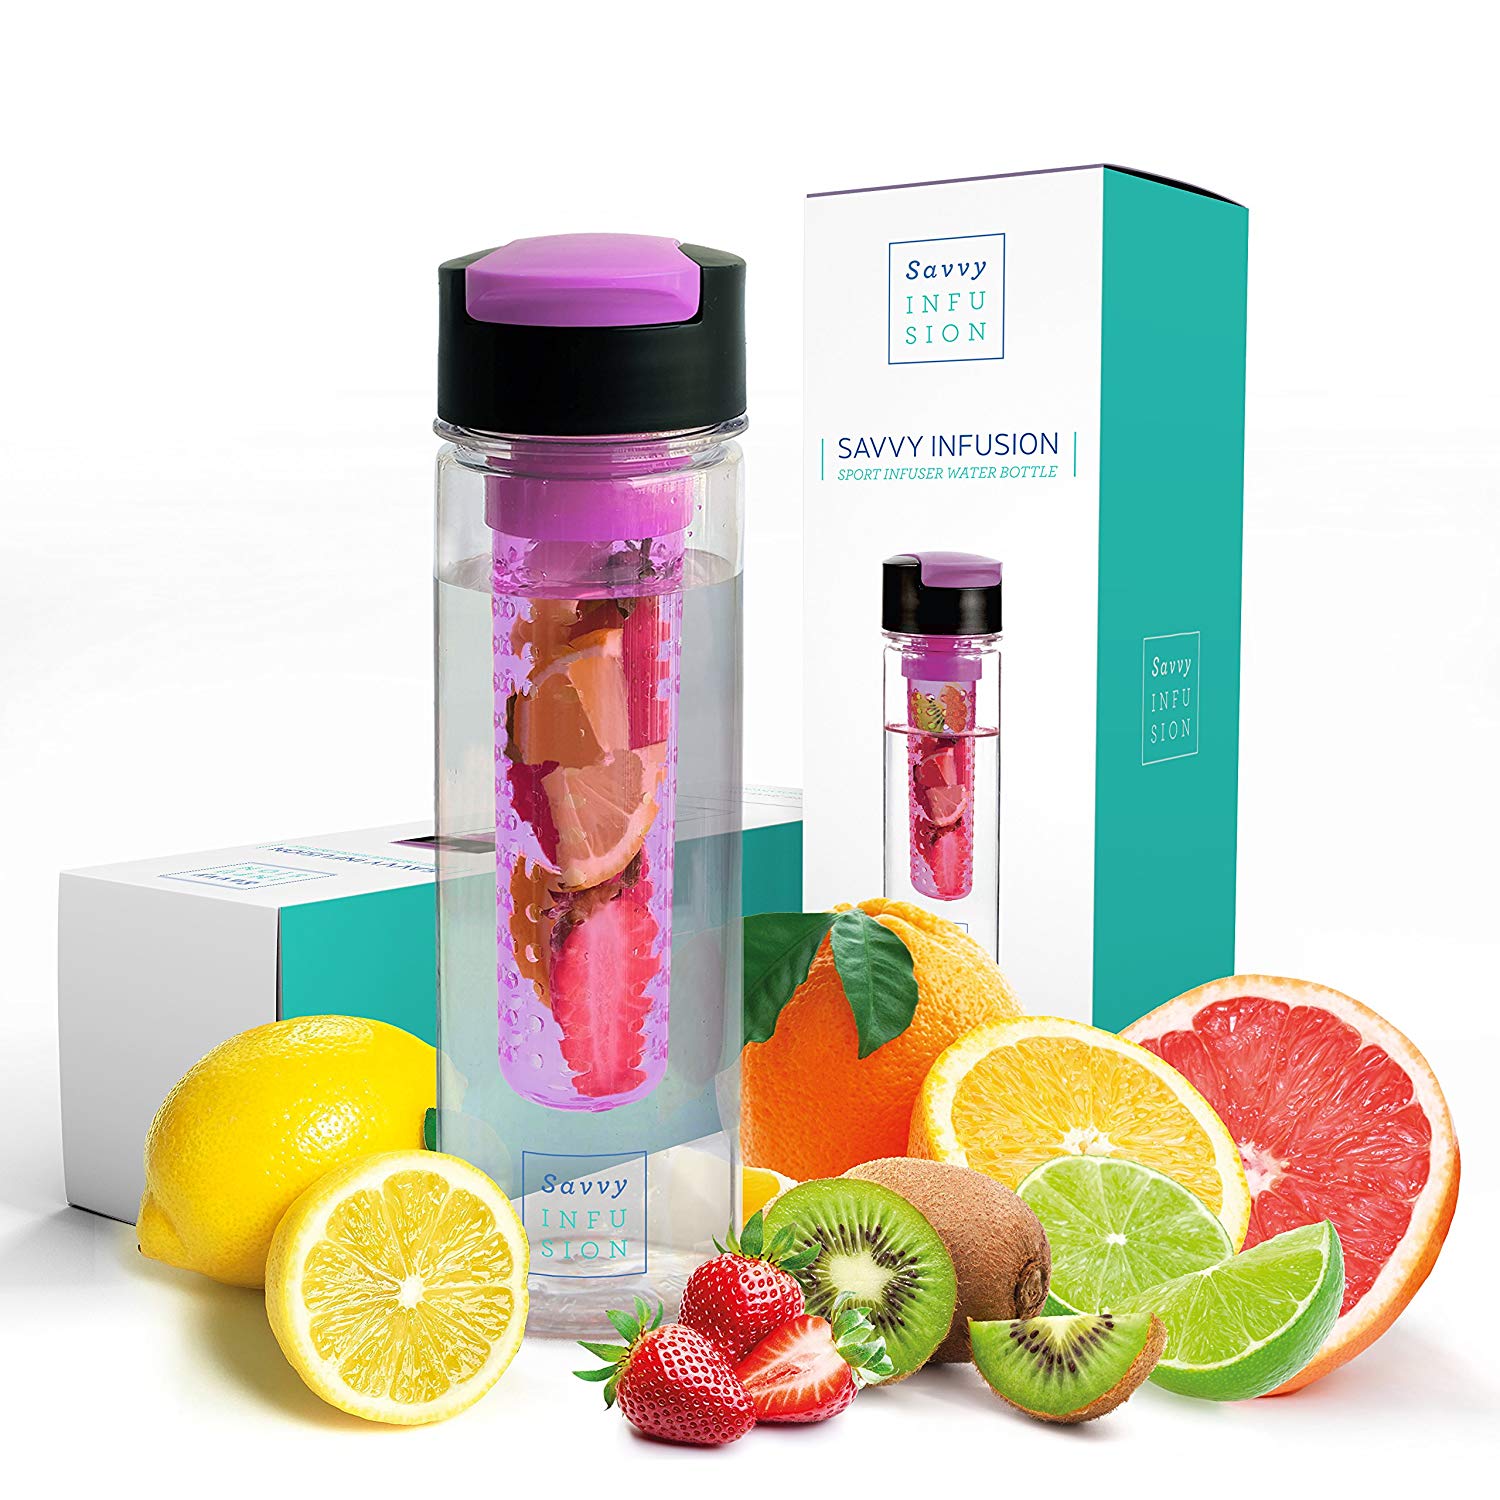 Savvy infusion flip top fruit infuser water bottle